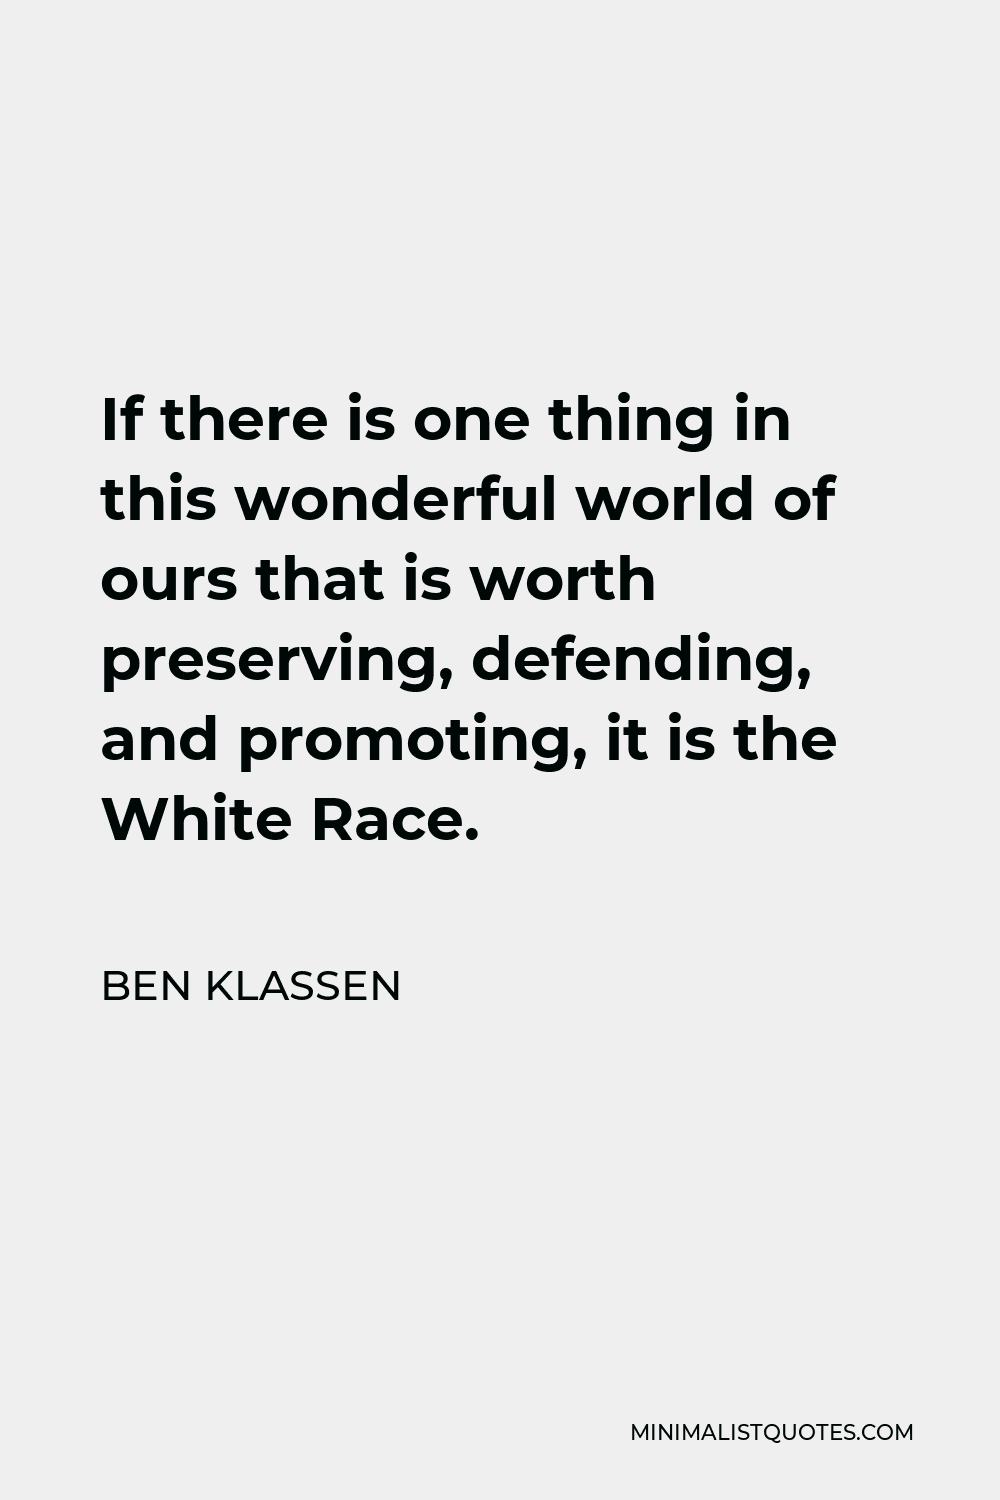 Ben Klassen Quote - If there is one thing in this wonderful world of ours that is worth preserving, defending, and promoting, it is the White Race.